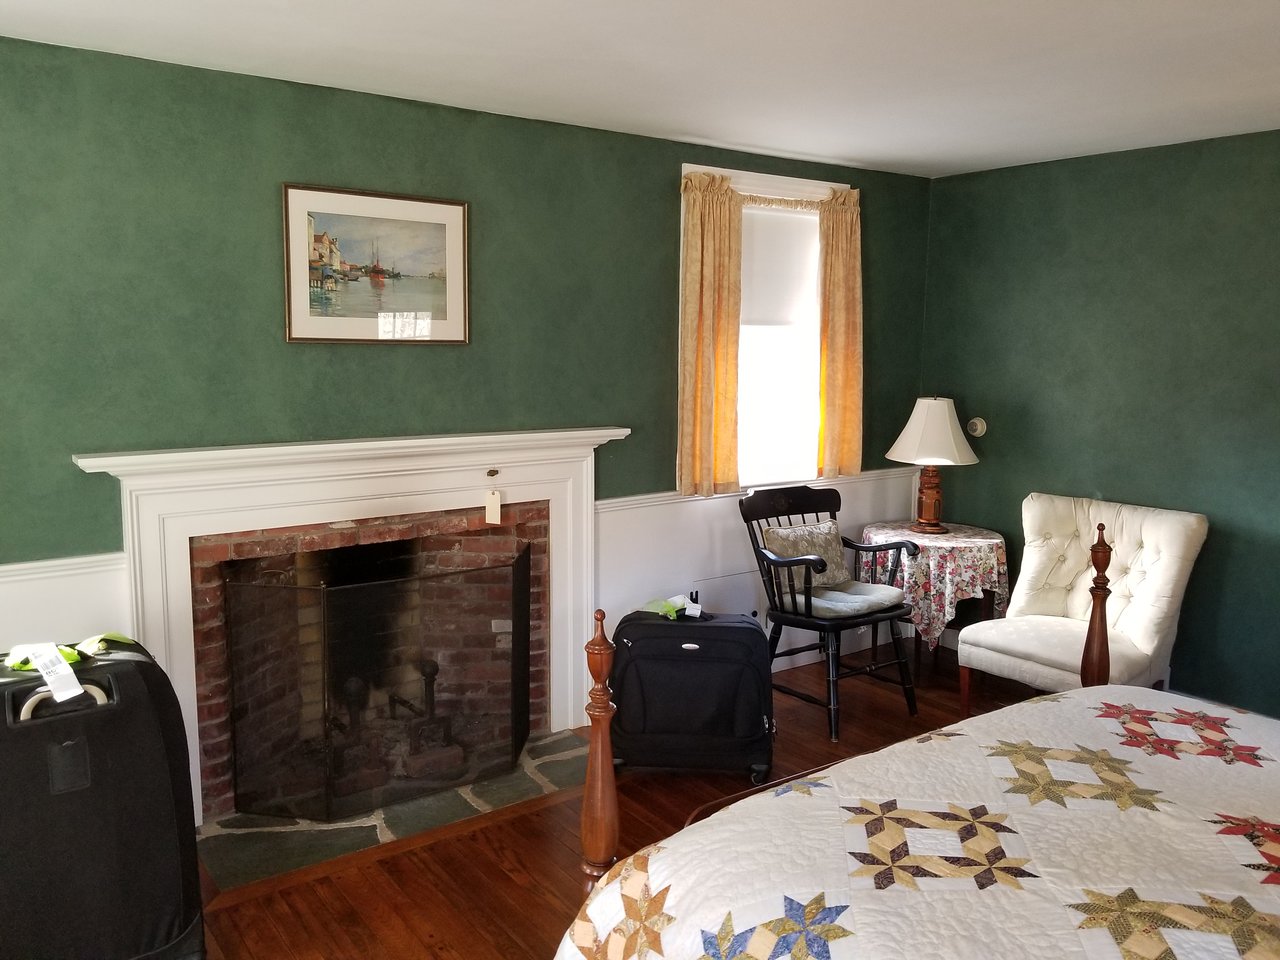 Salters Fireplace Beautiful Charlotte S House Bed and Breakfast Updated 2019 B&b